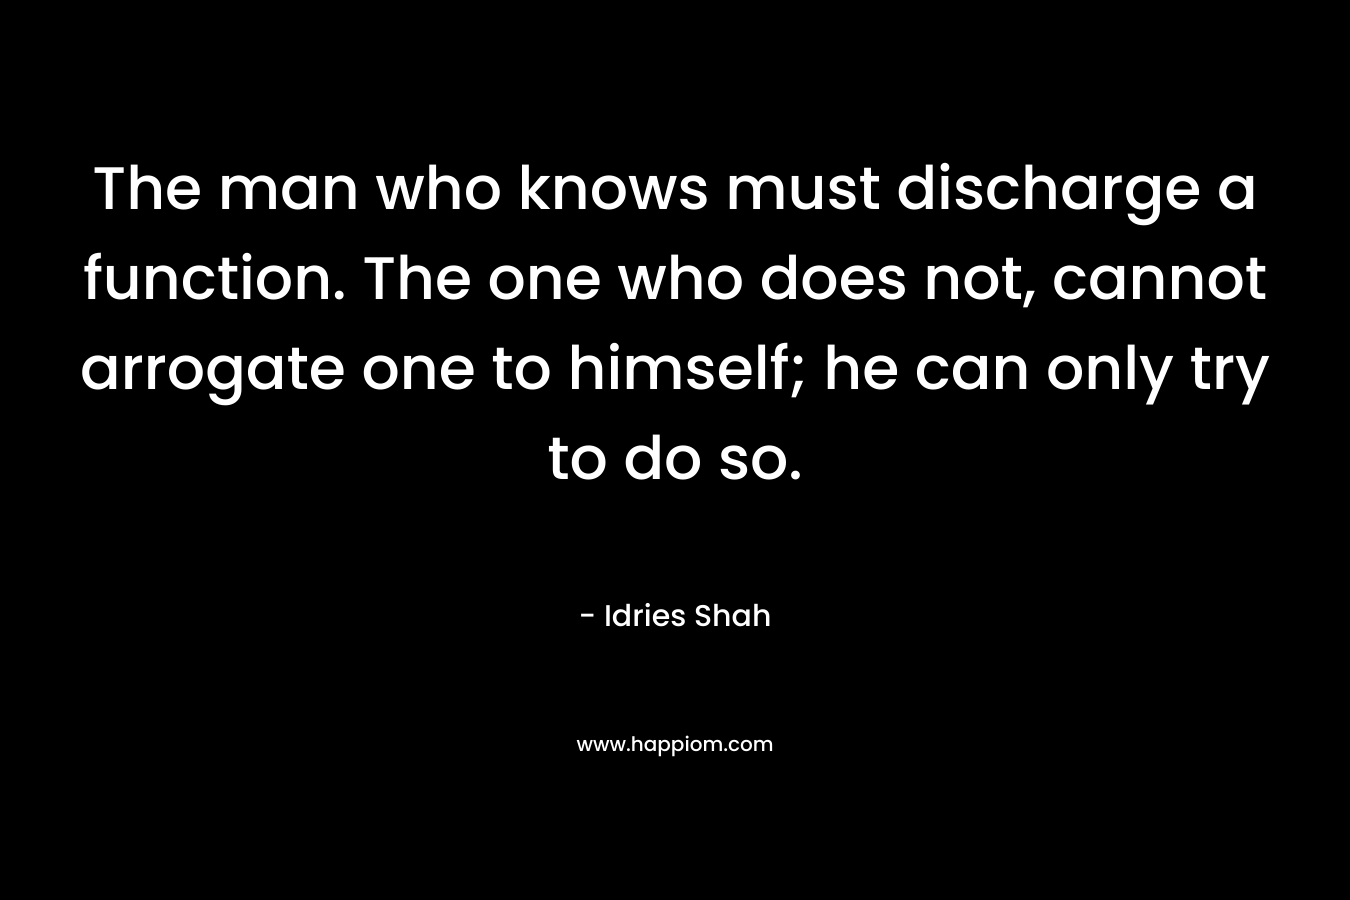 The man who knows must discharge a function. The one who does not, cannot arrogate one to himself; he can only try to do so. – Idries Shah